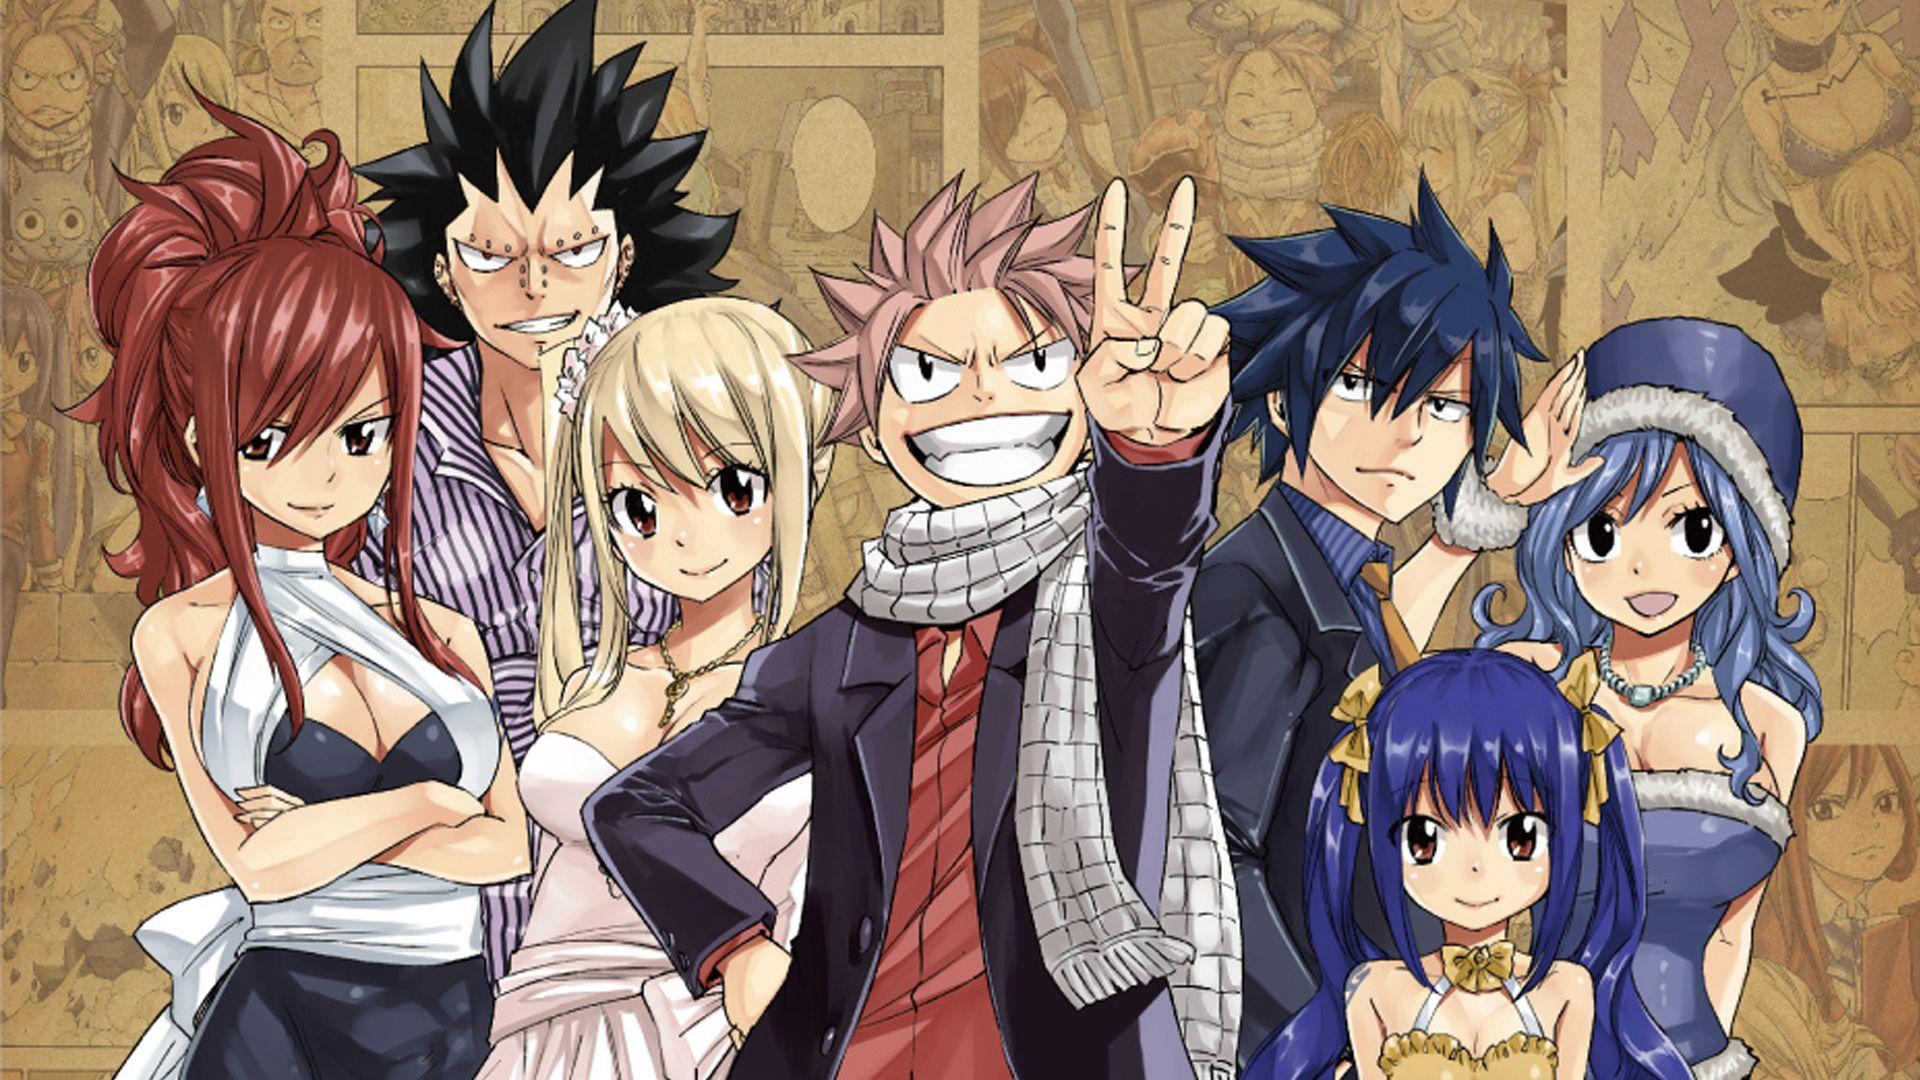 100 Free Fairy Tail HD Wallpapers & Backgrounds 